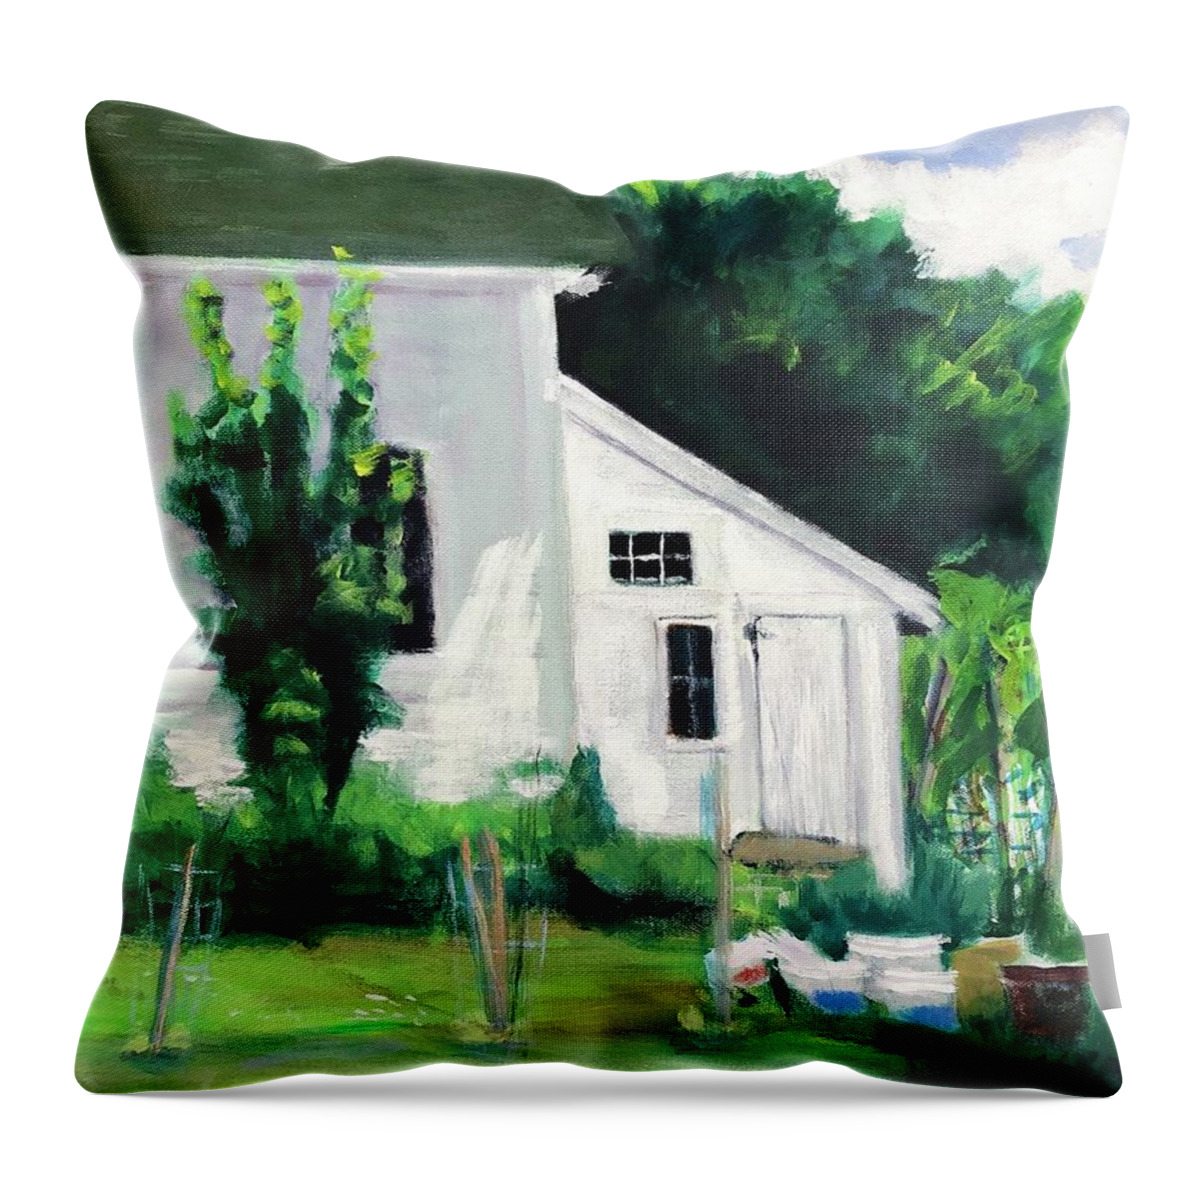 Home Town Throw Pillow featuring the painting Garden Shed by Cyndie Katz